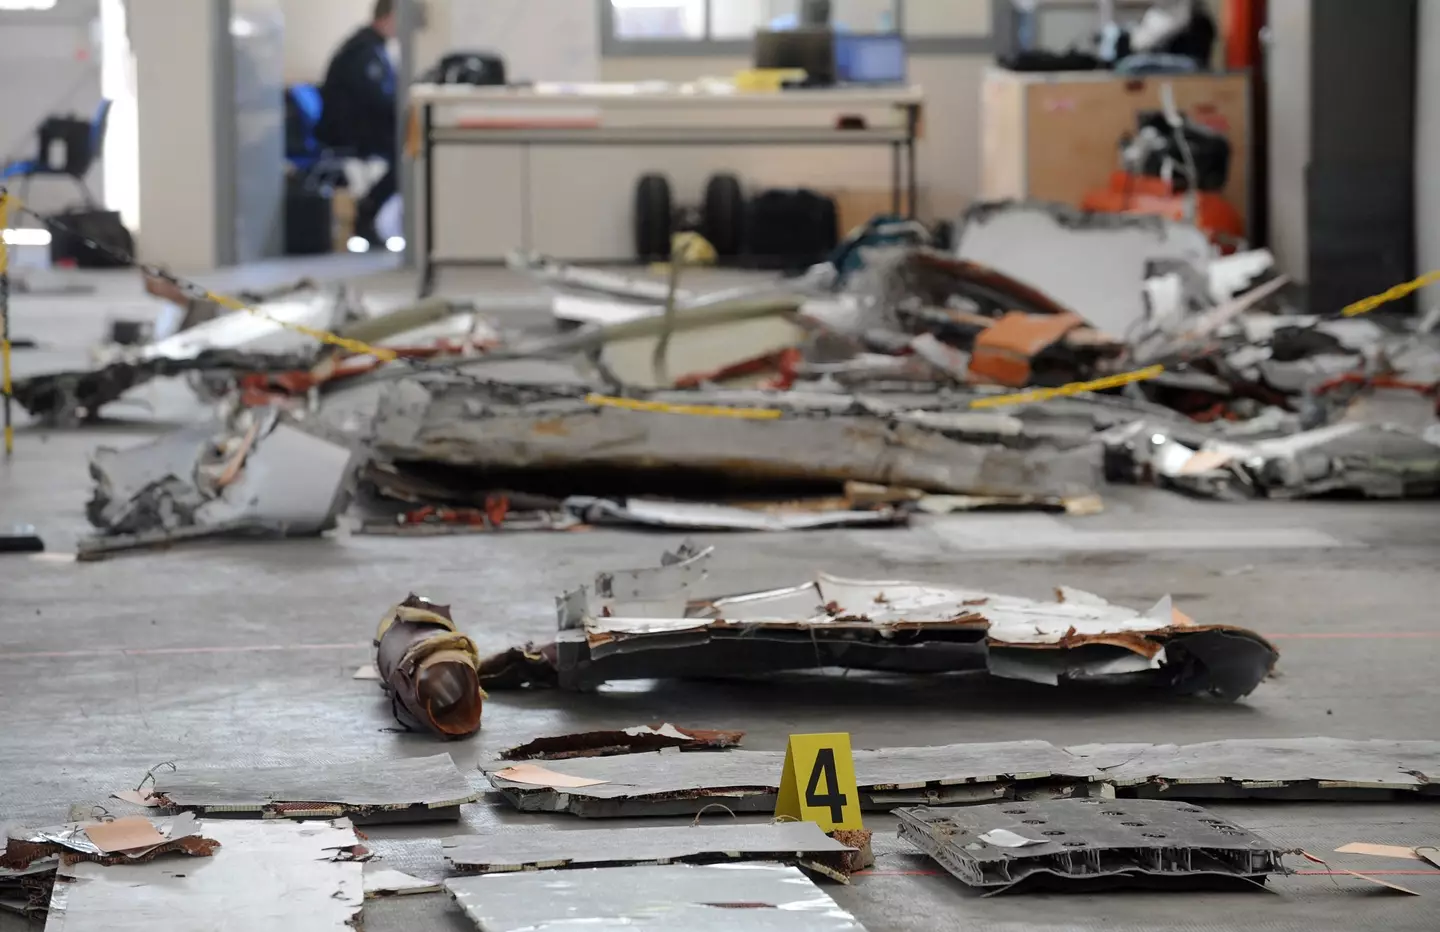 Debris from the flight 447. (ERIC CABANIS/AFP via Getty Images)